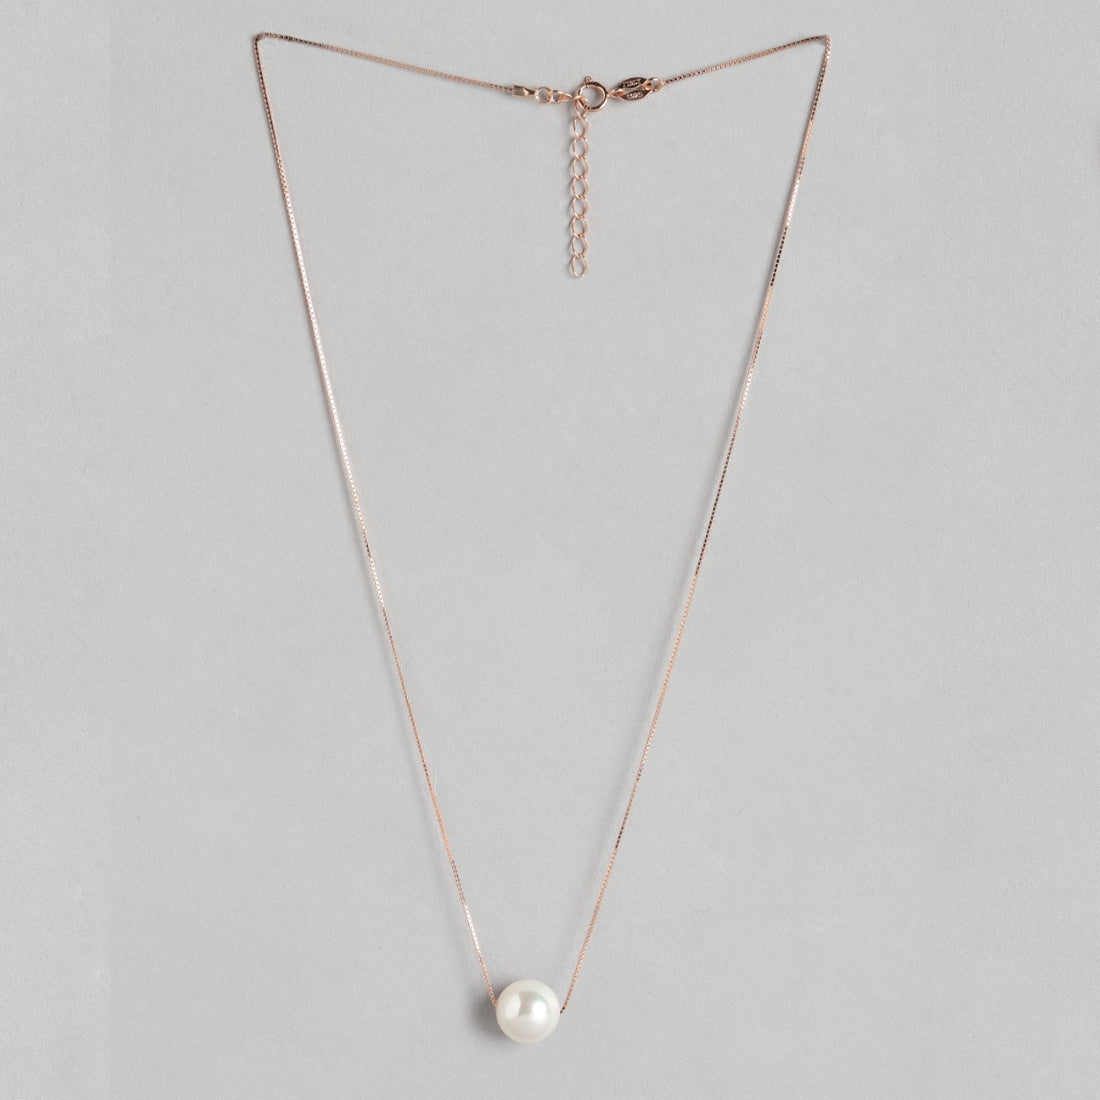 Stunning Pearl 925 Silver Necklace Combo